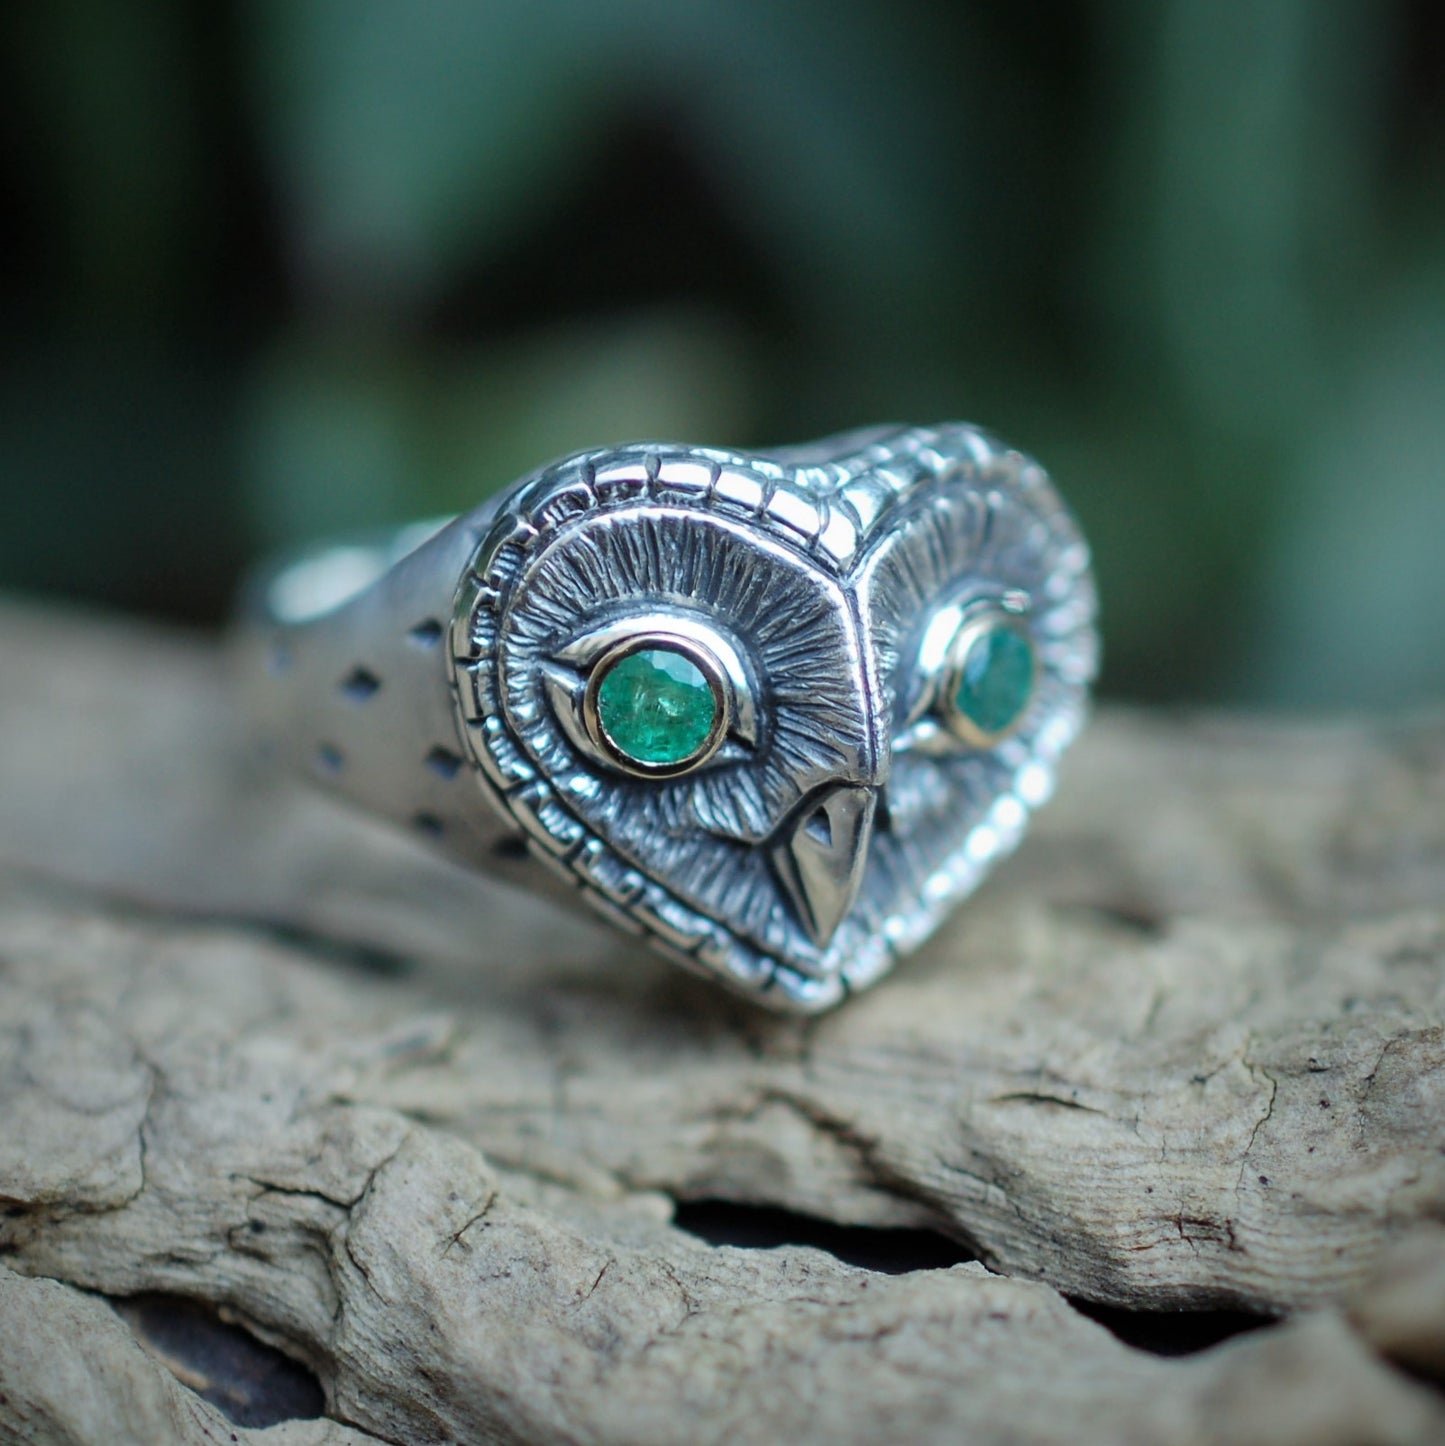 Owl ring, silver gold and emerald ring, sterling silver barn owl with gold and emerald eyes, antique finish. © Adrian Ashley